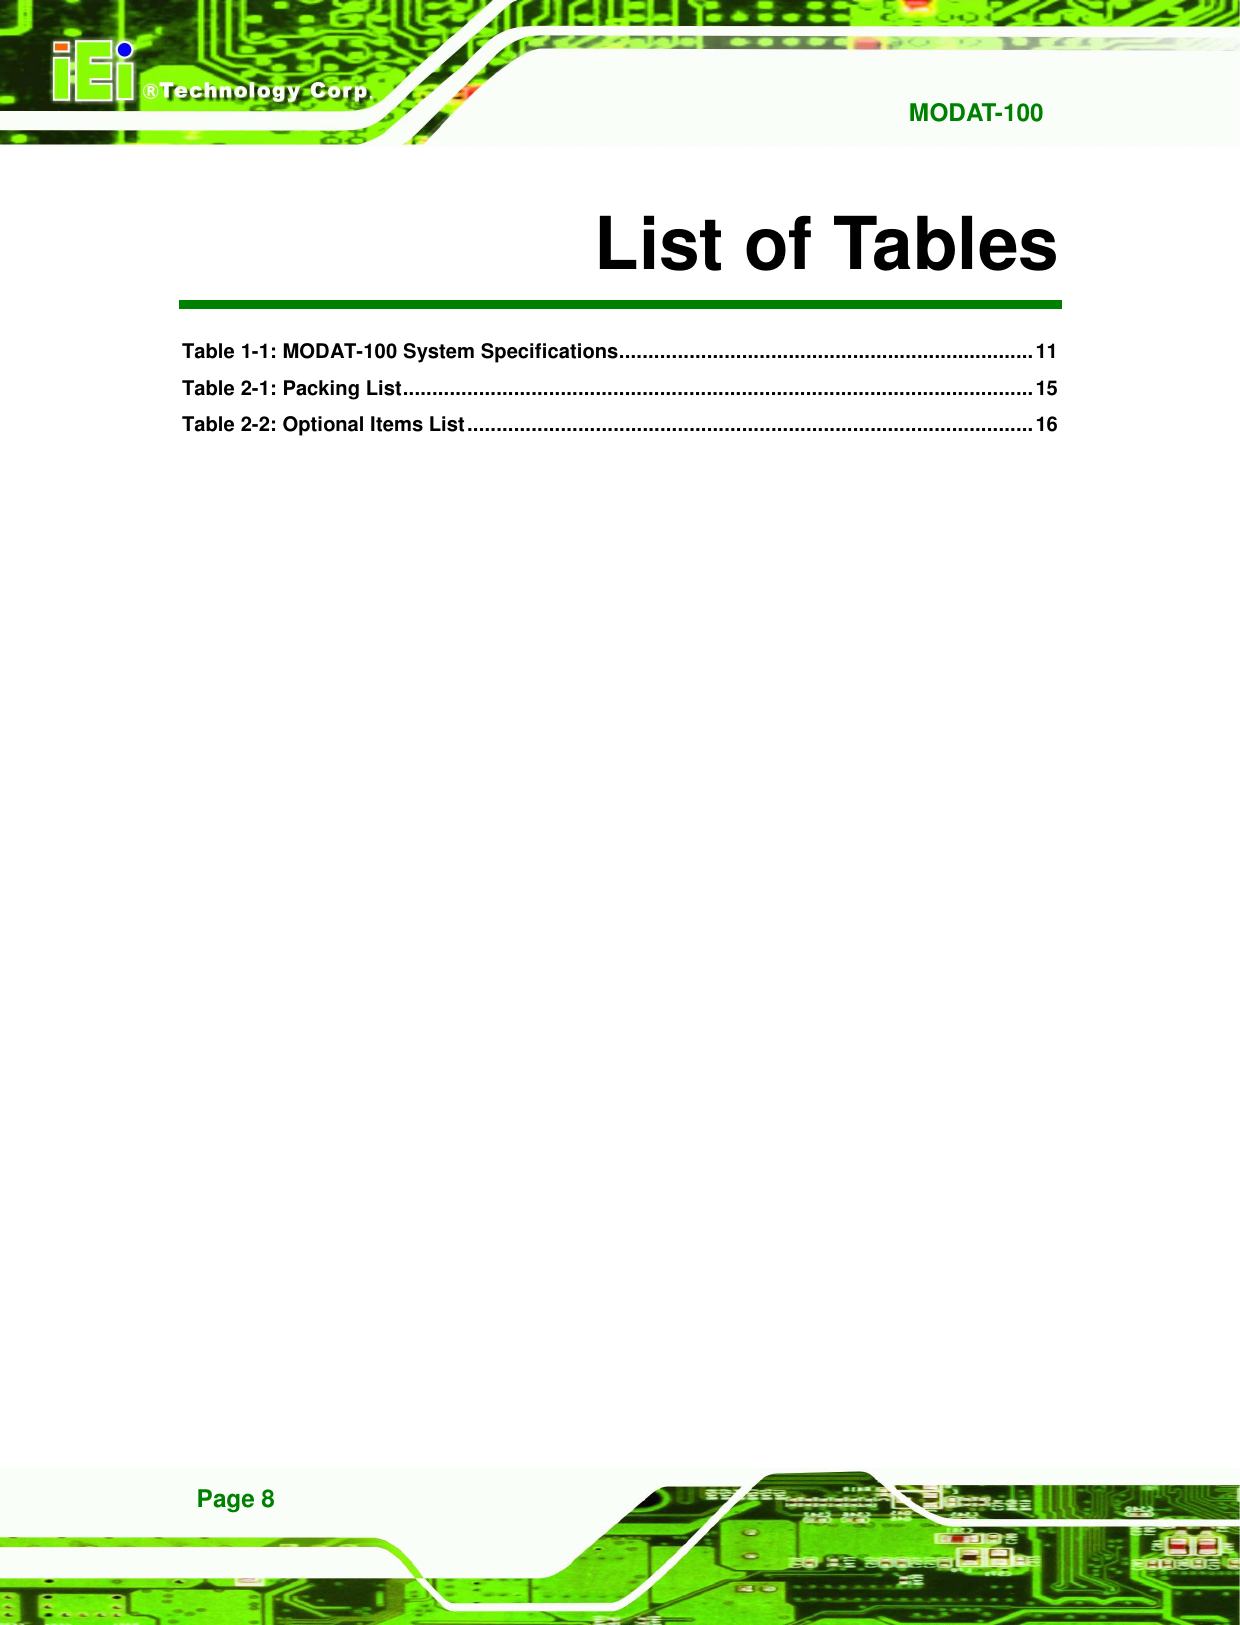   MODAT-100 Page 8 List of Tables Table 1-1: MODAT-100 System Specifications.......................................................................11 Table 2-1: Packing List............................................................................................................15 Table 2-2: Optional Items List.................................................................................................16  